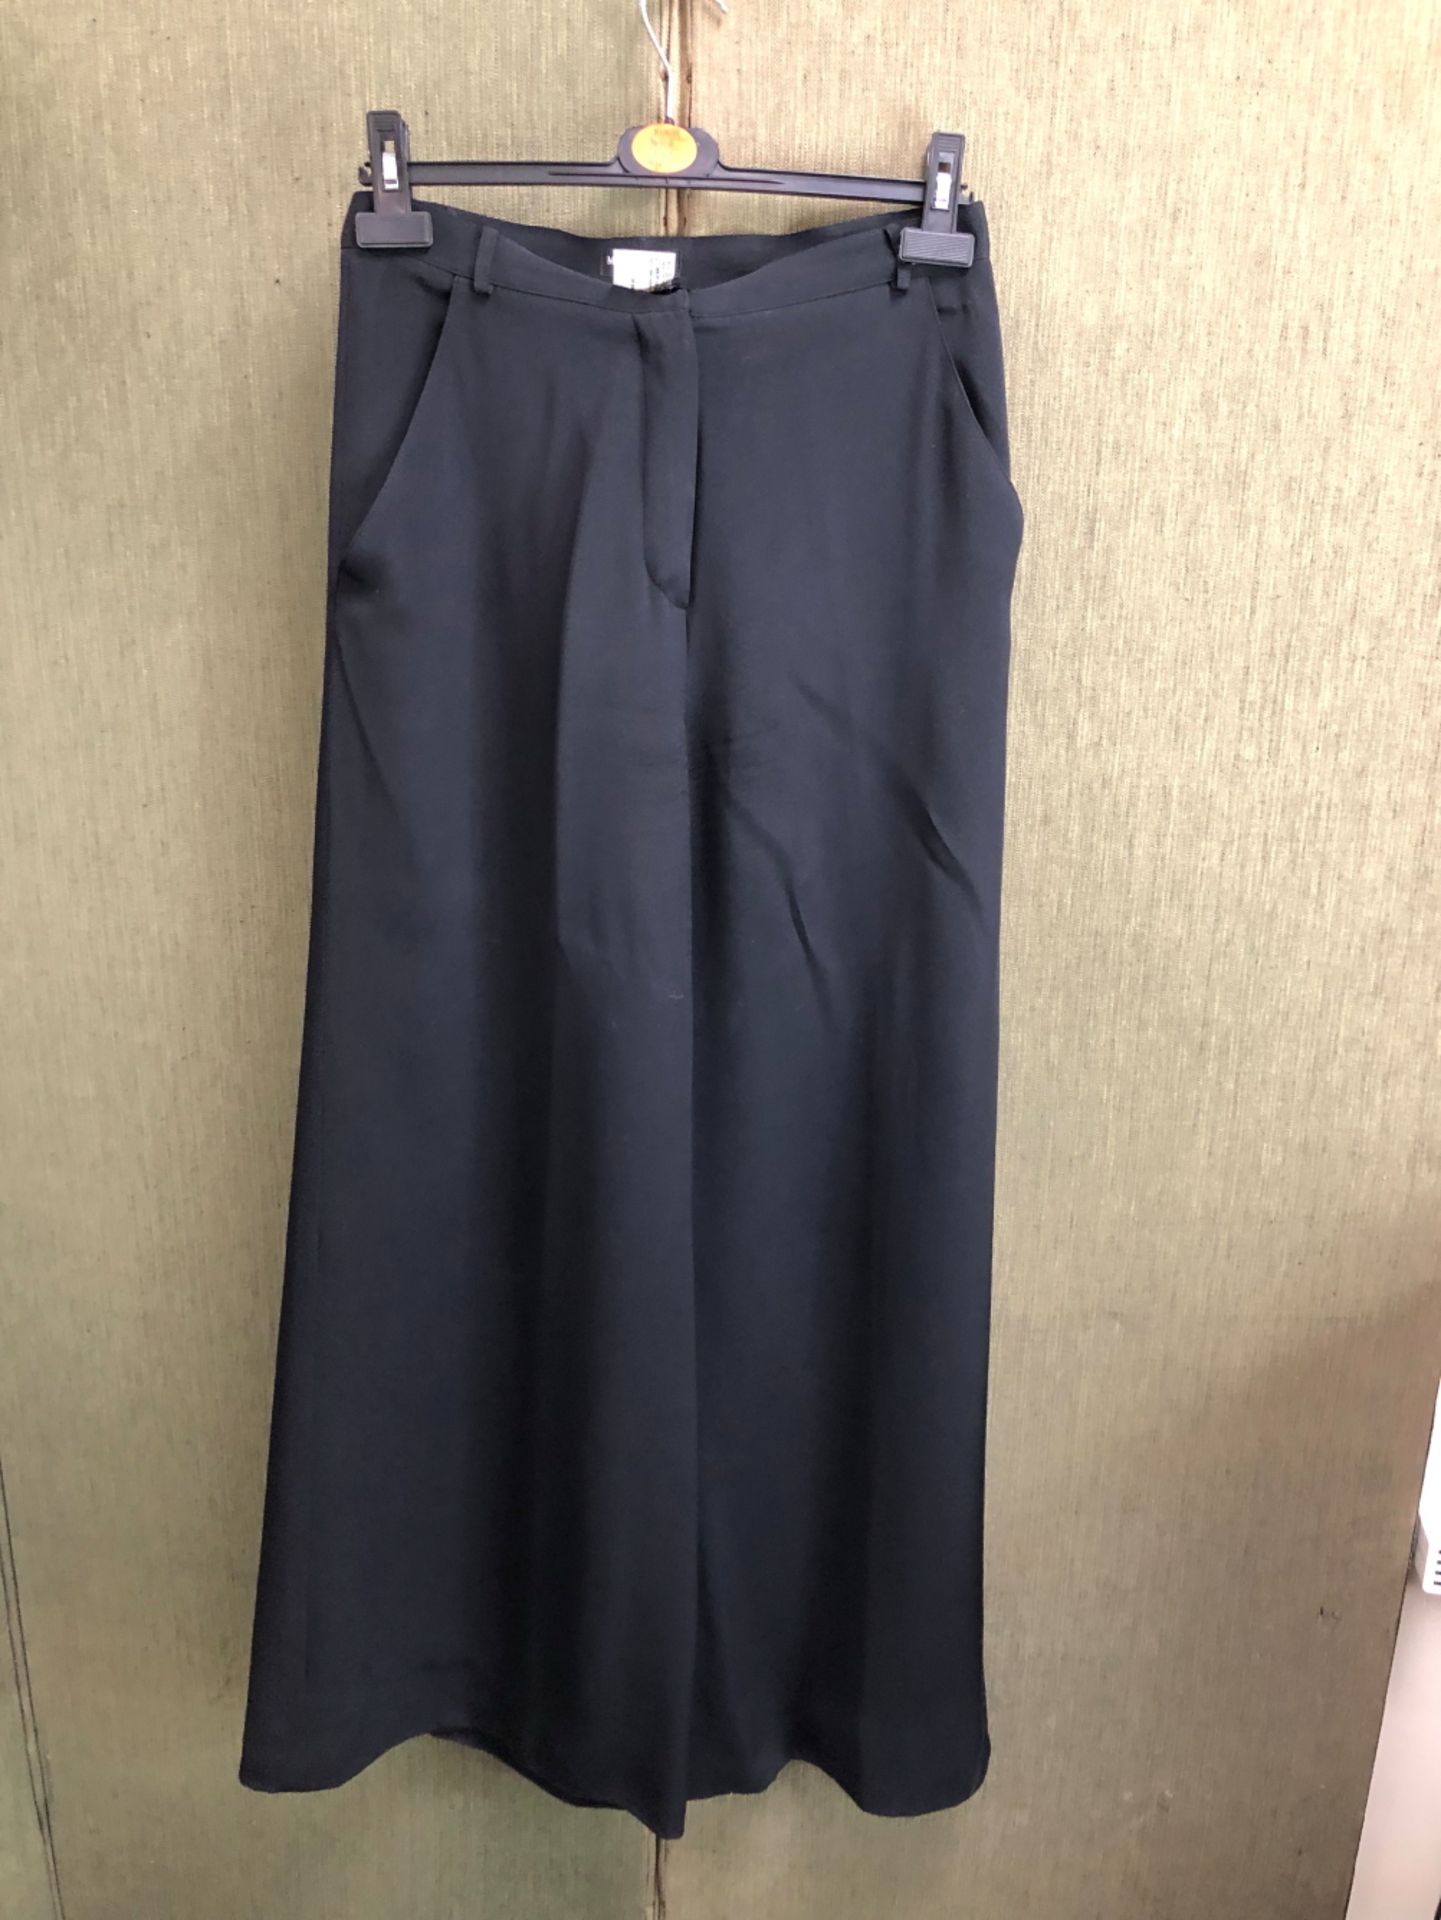 A PAIR OF WIDE LEGGED BLACK TROUSERS BY MARIO BORSATO COUTURE SIZE 44 AND A BLACK MARIO BORSATO - Image 16 of 25